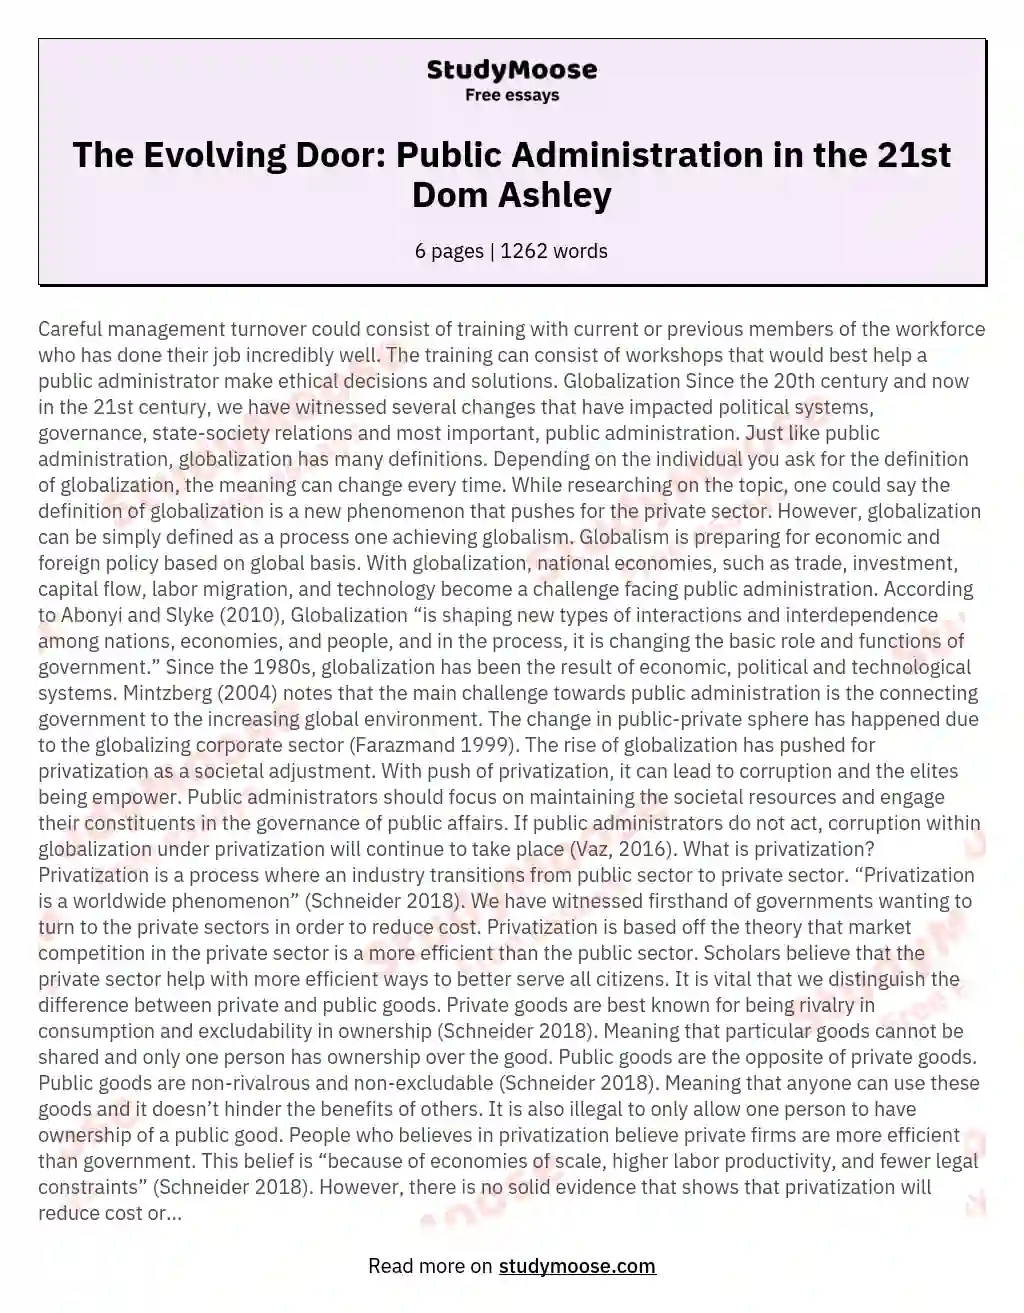 The Evolving Door: Public Administration in the 21st Dom Ashley essay